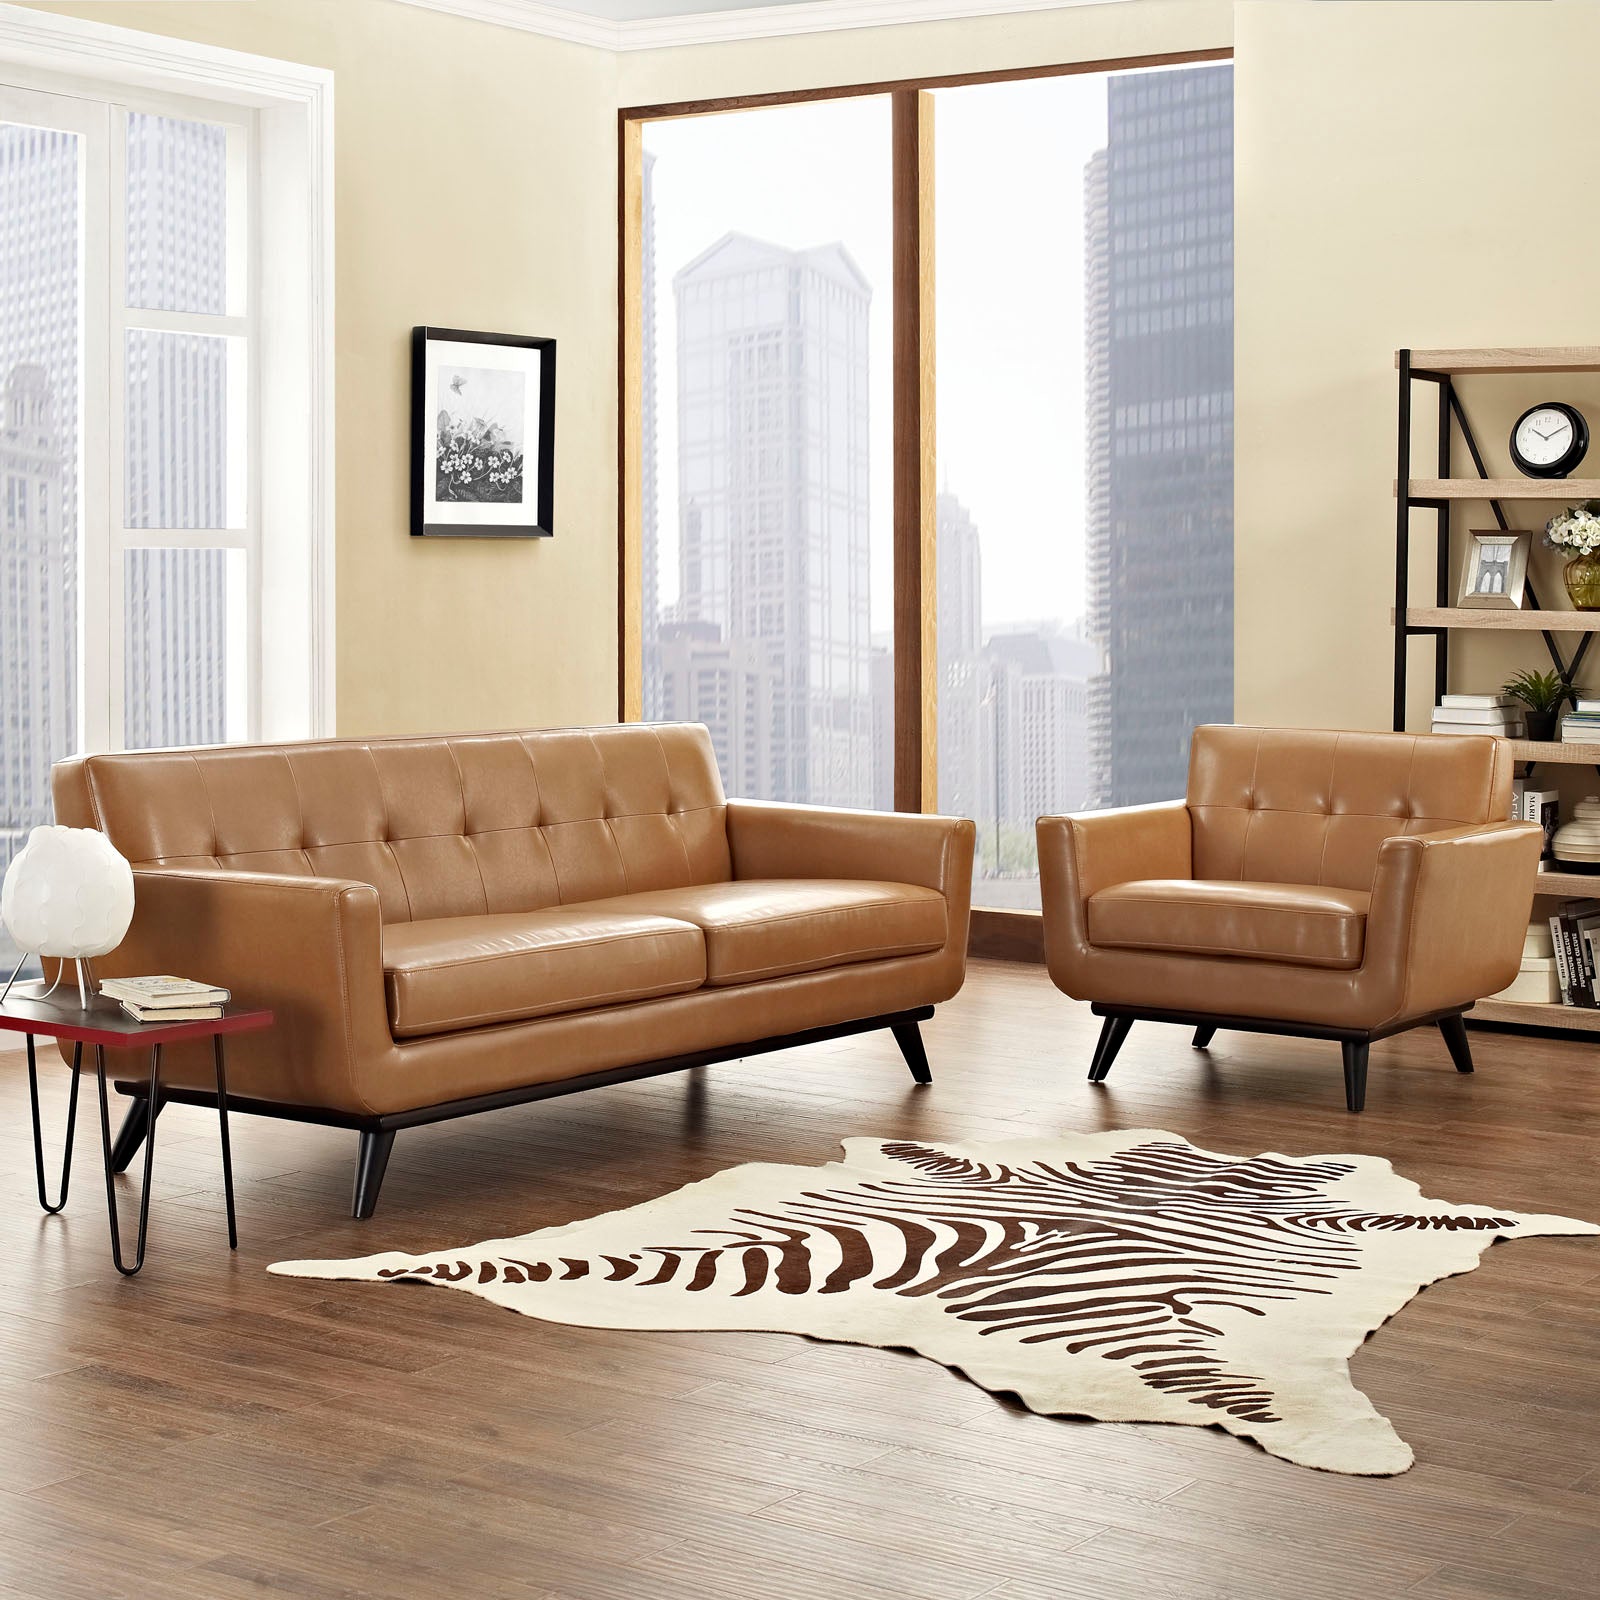 Engage 2 Piece Leather Living Room Set - East Shore Modern Home Furnishings